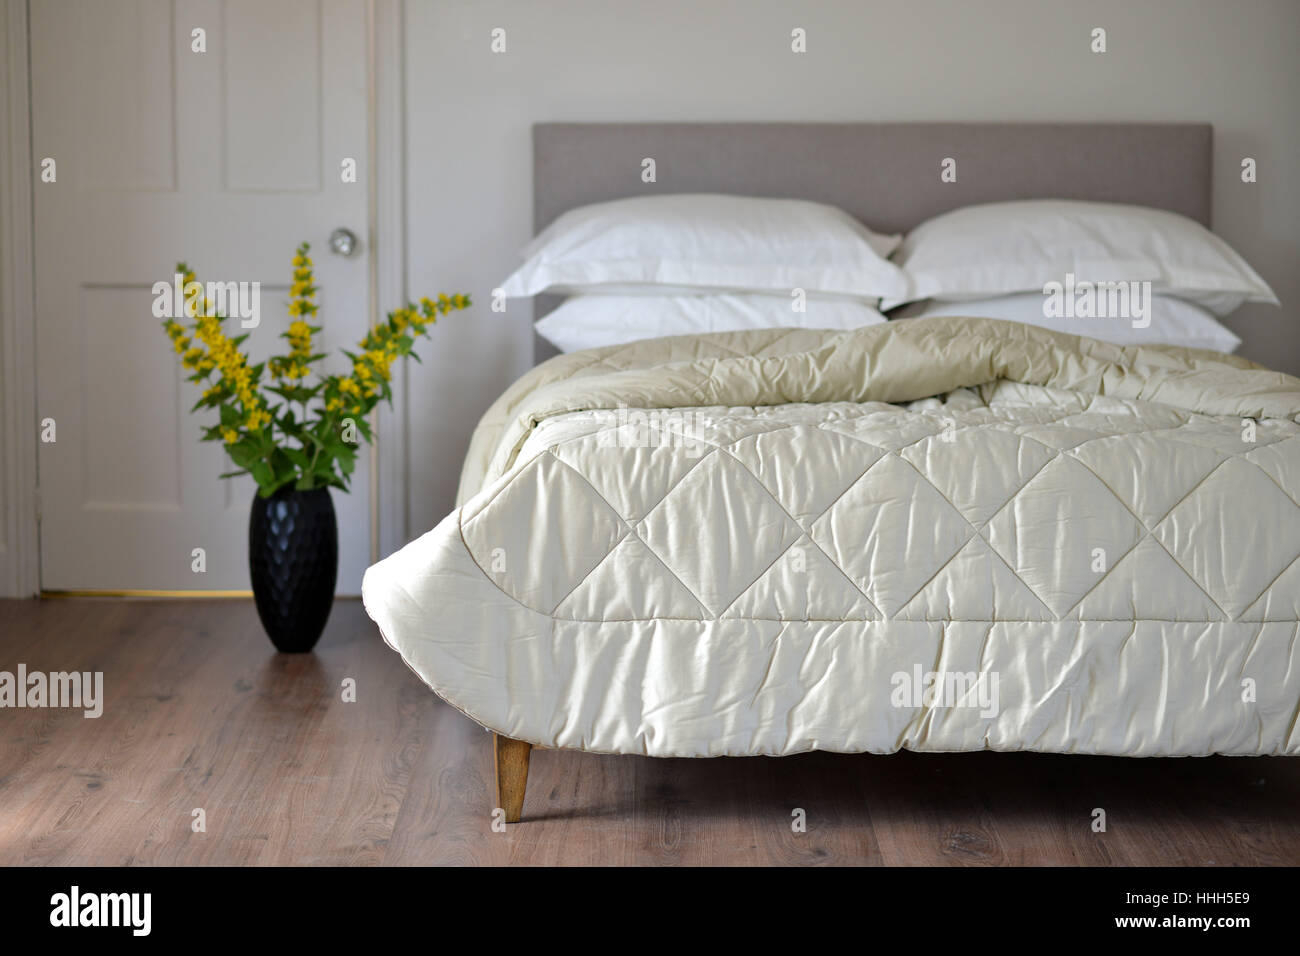 Bed in bedroom setting with luxury bedspread Stock Photo